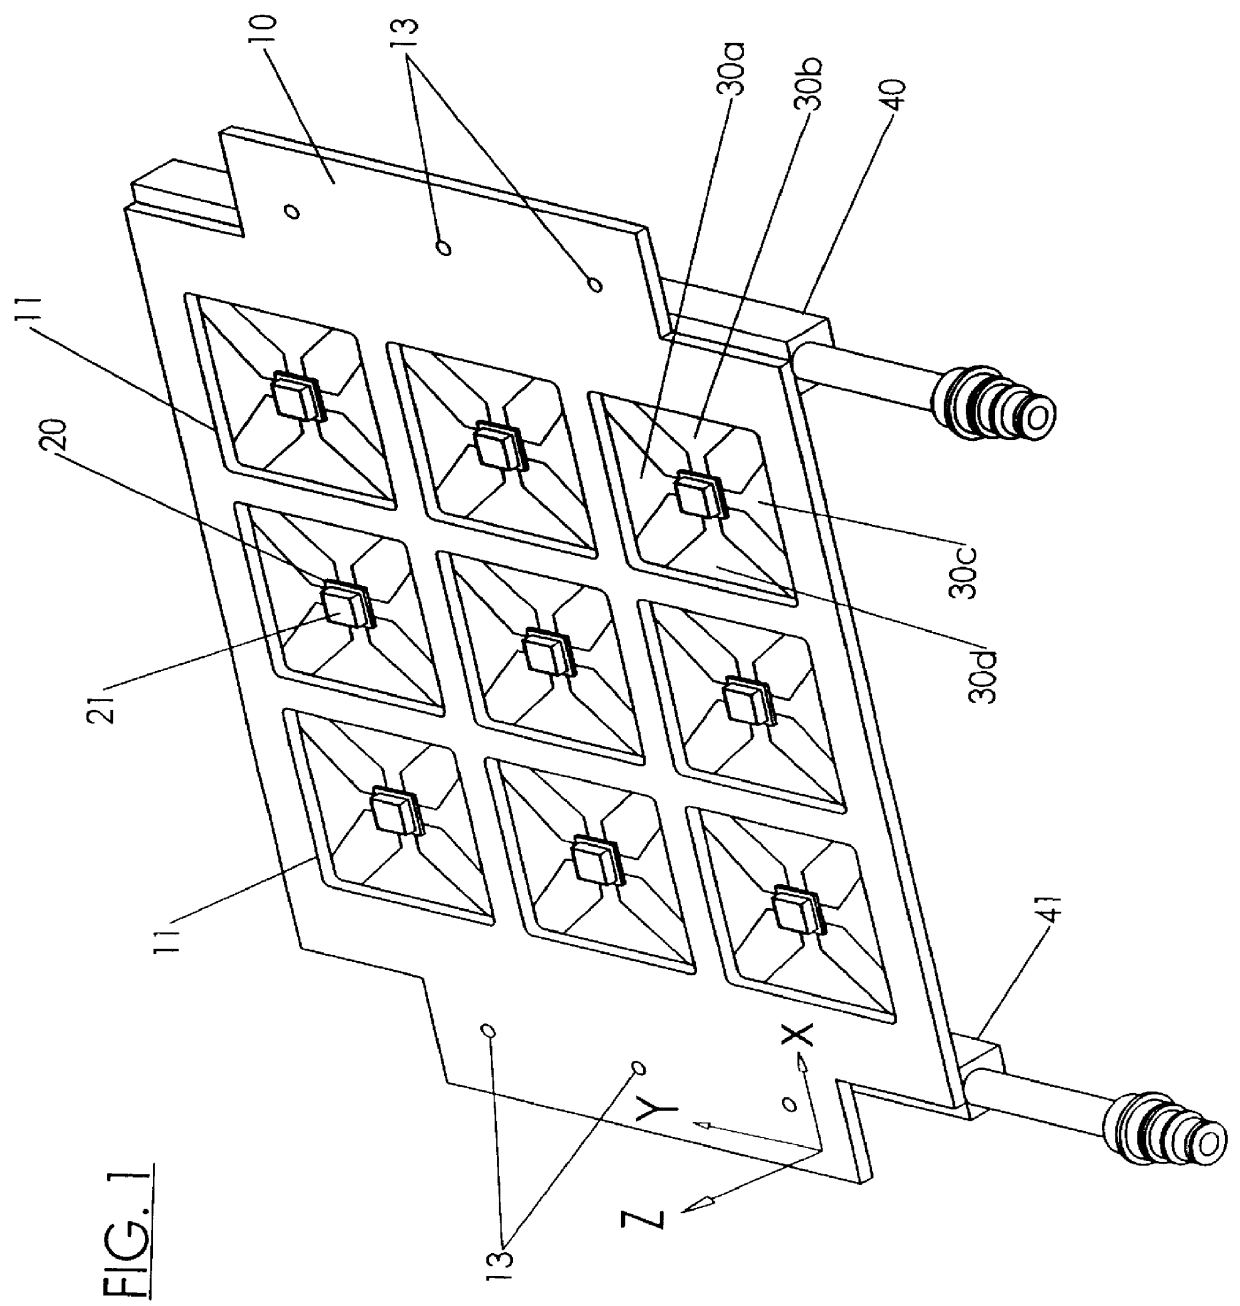 Mechanical assembly for regulating the temperature of an electronic device which incorporates a single leaf spring for self-alignment plus a low initial contact force and a low profile